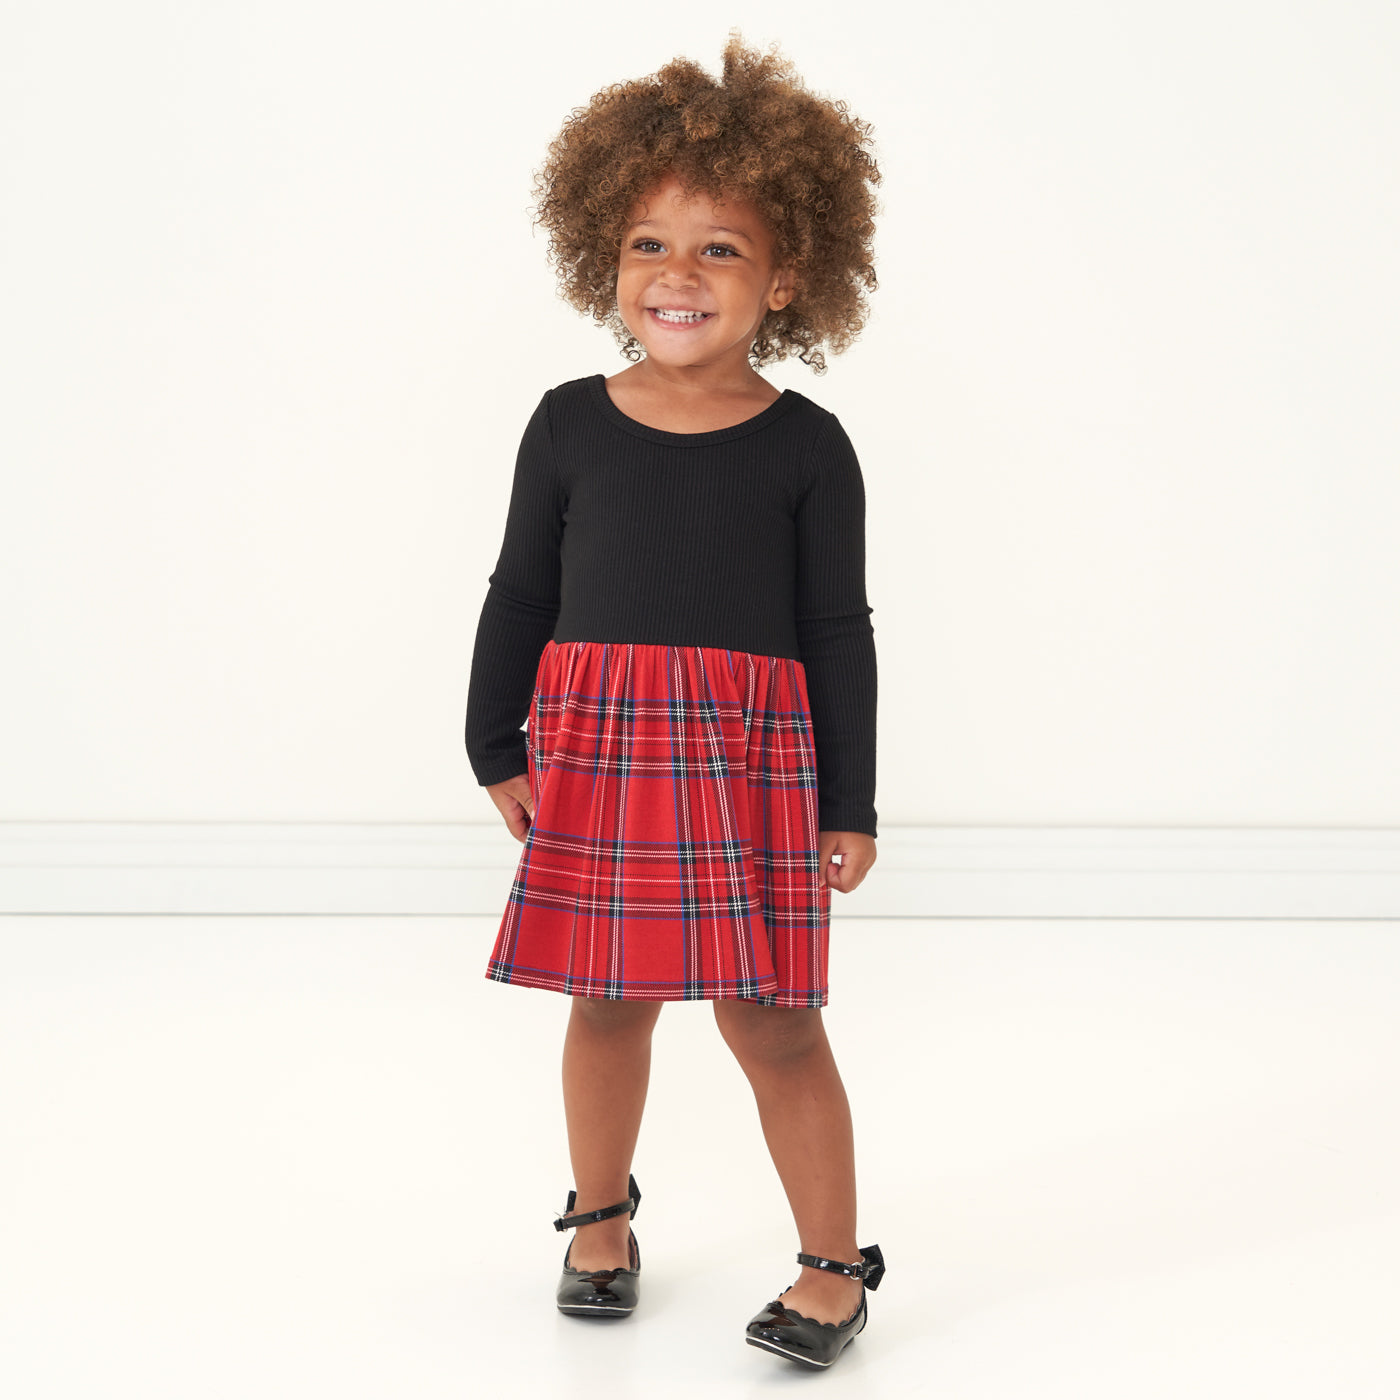 Child wearing a Holiday Plaid skater dress with bodysuit